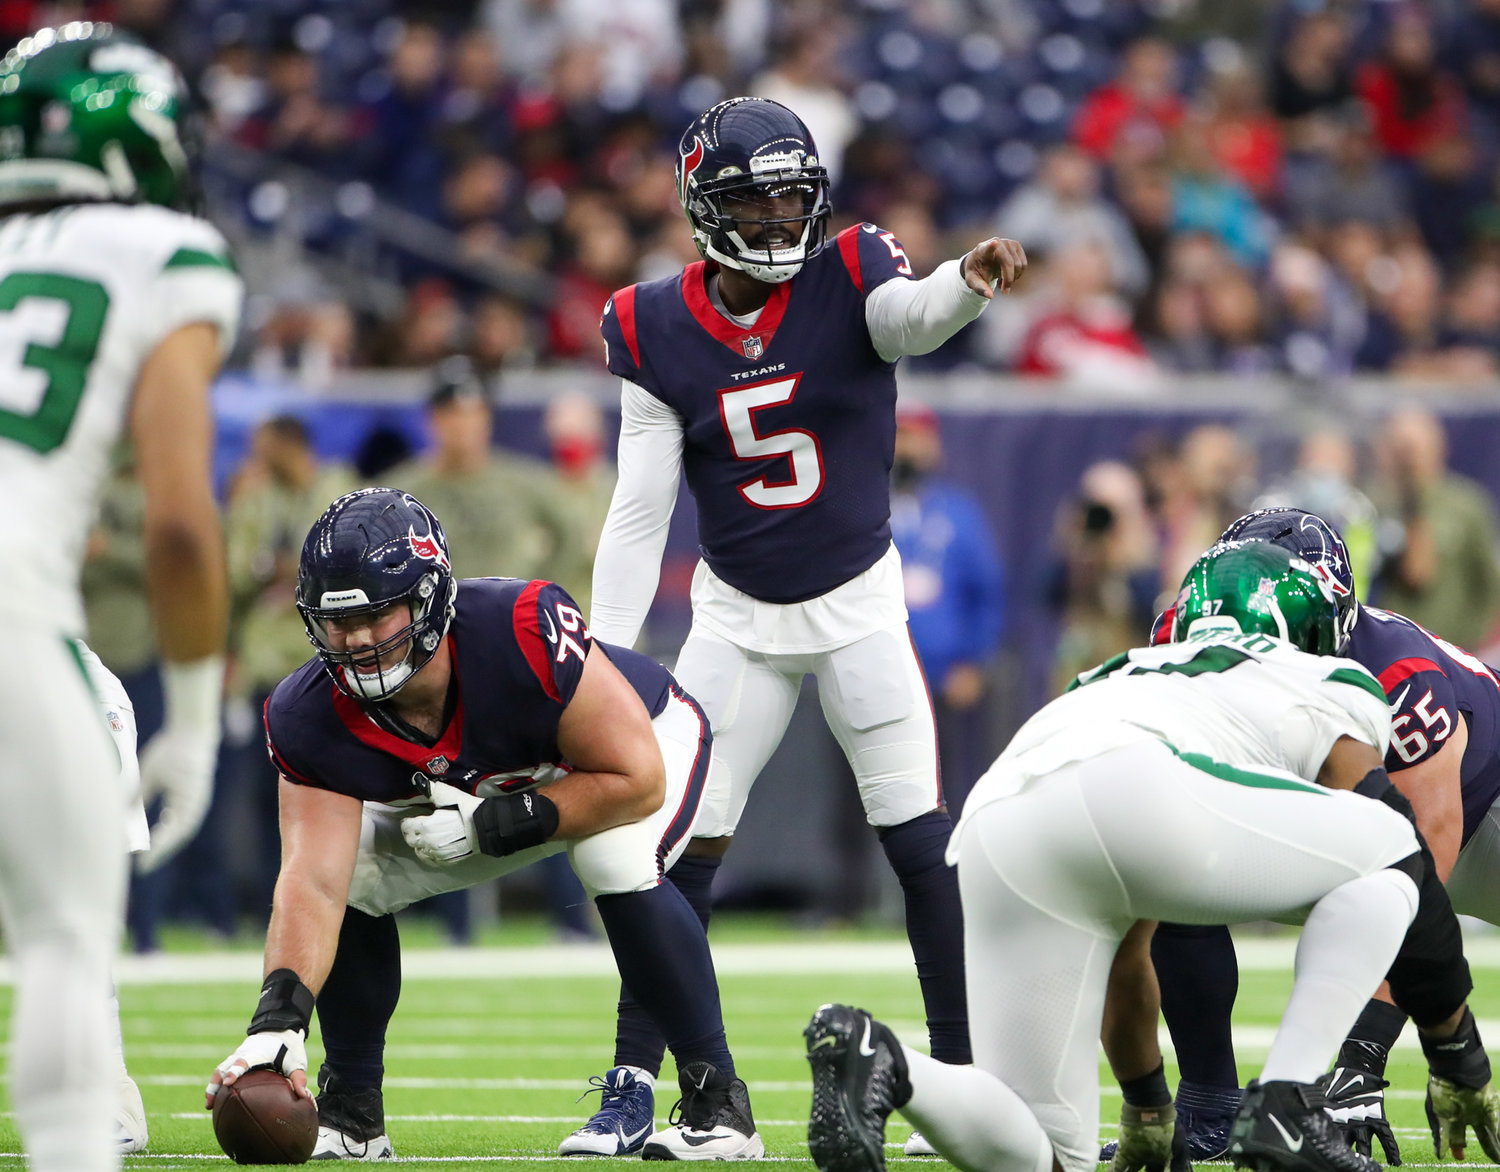 Houston Texans quarterback Tyrod Taylor (5) during an NFL game between the Houston Texans and the New York Jets on November 28, 2021 in Houston, Texas. The Jets won, 21-14